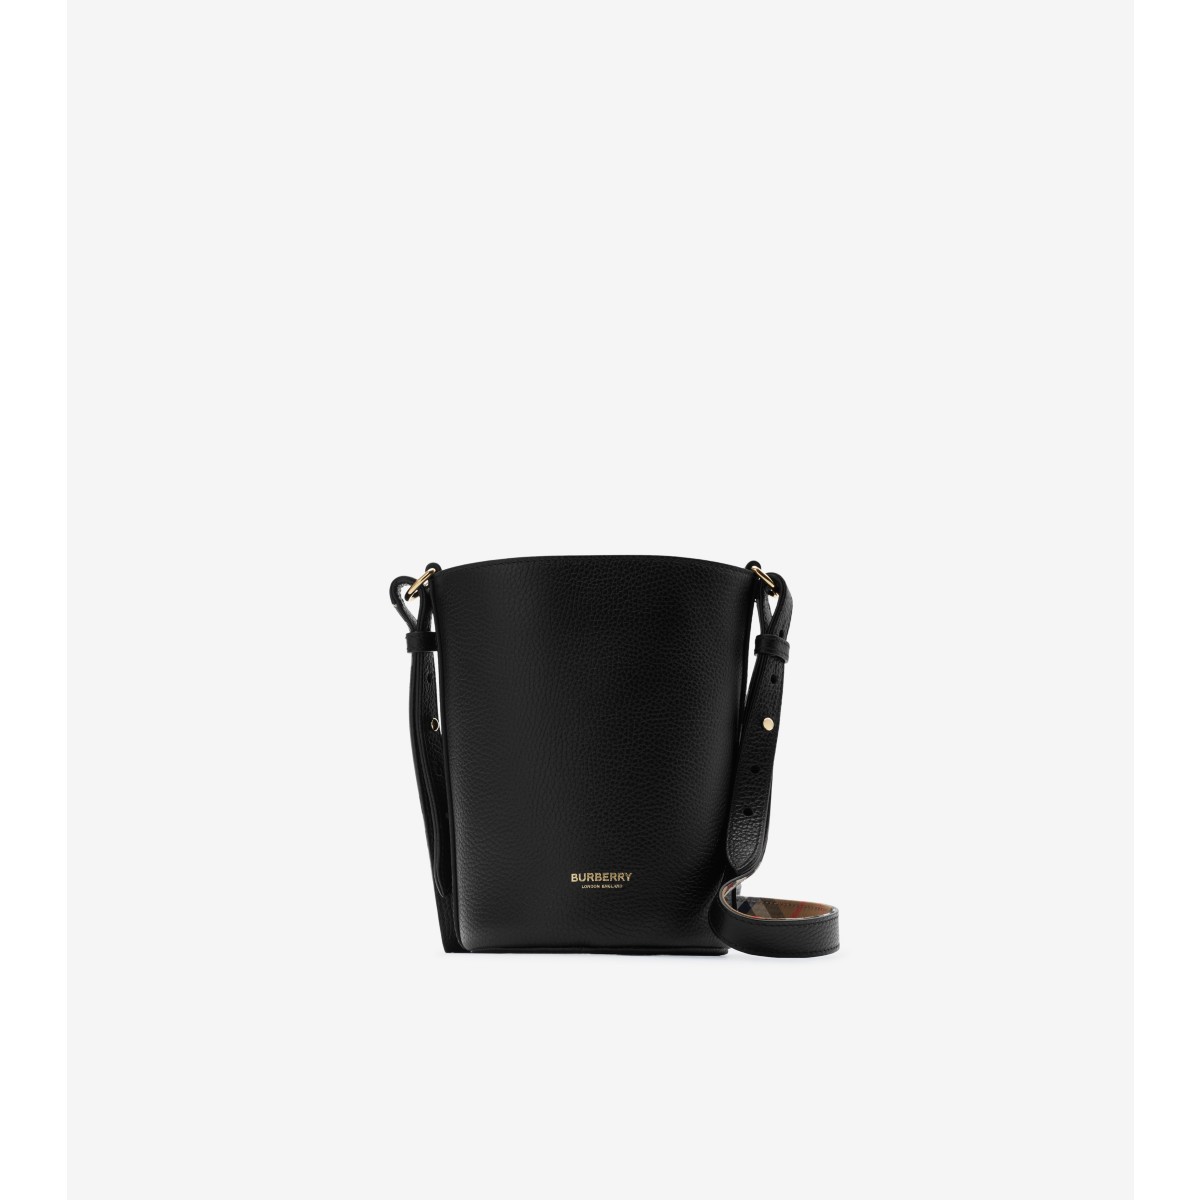 Burberry Small Bucket Bag In Black